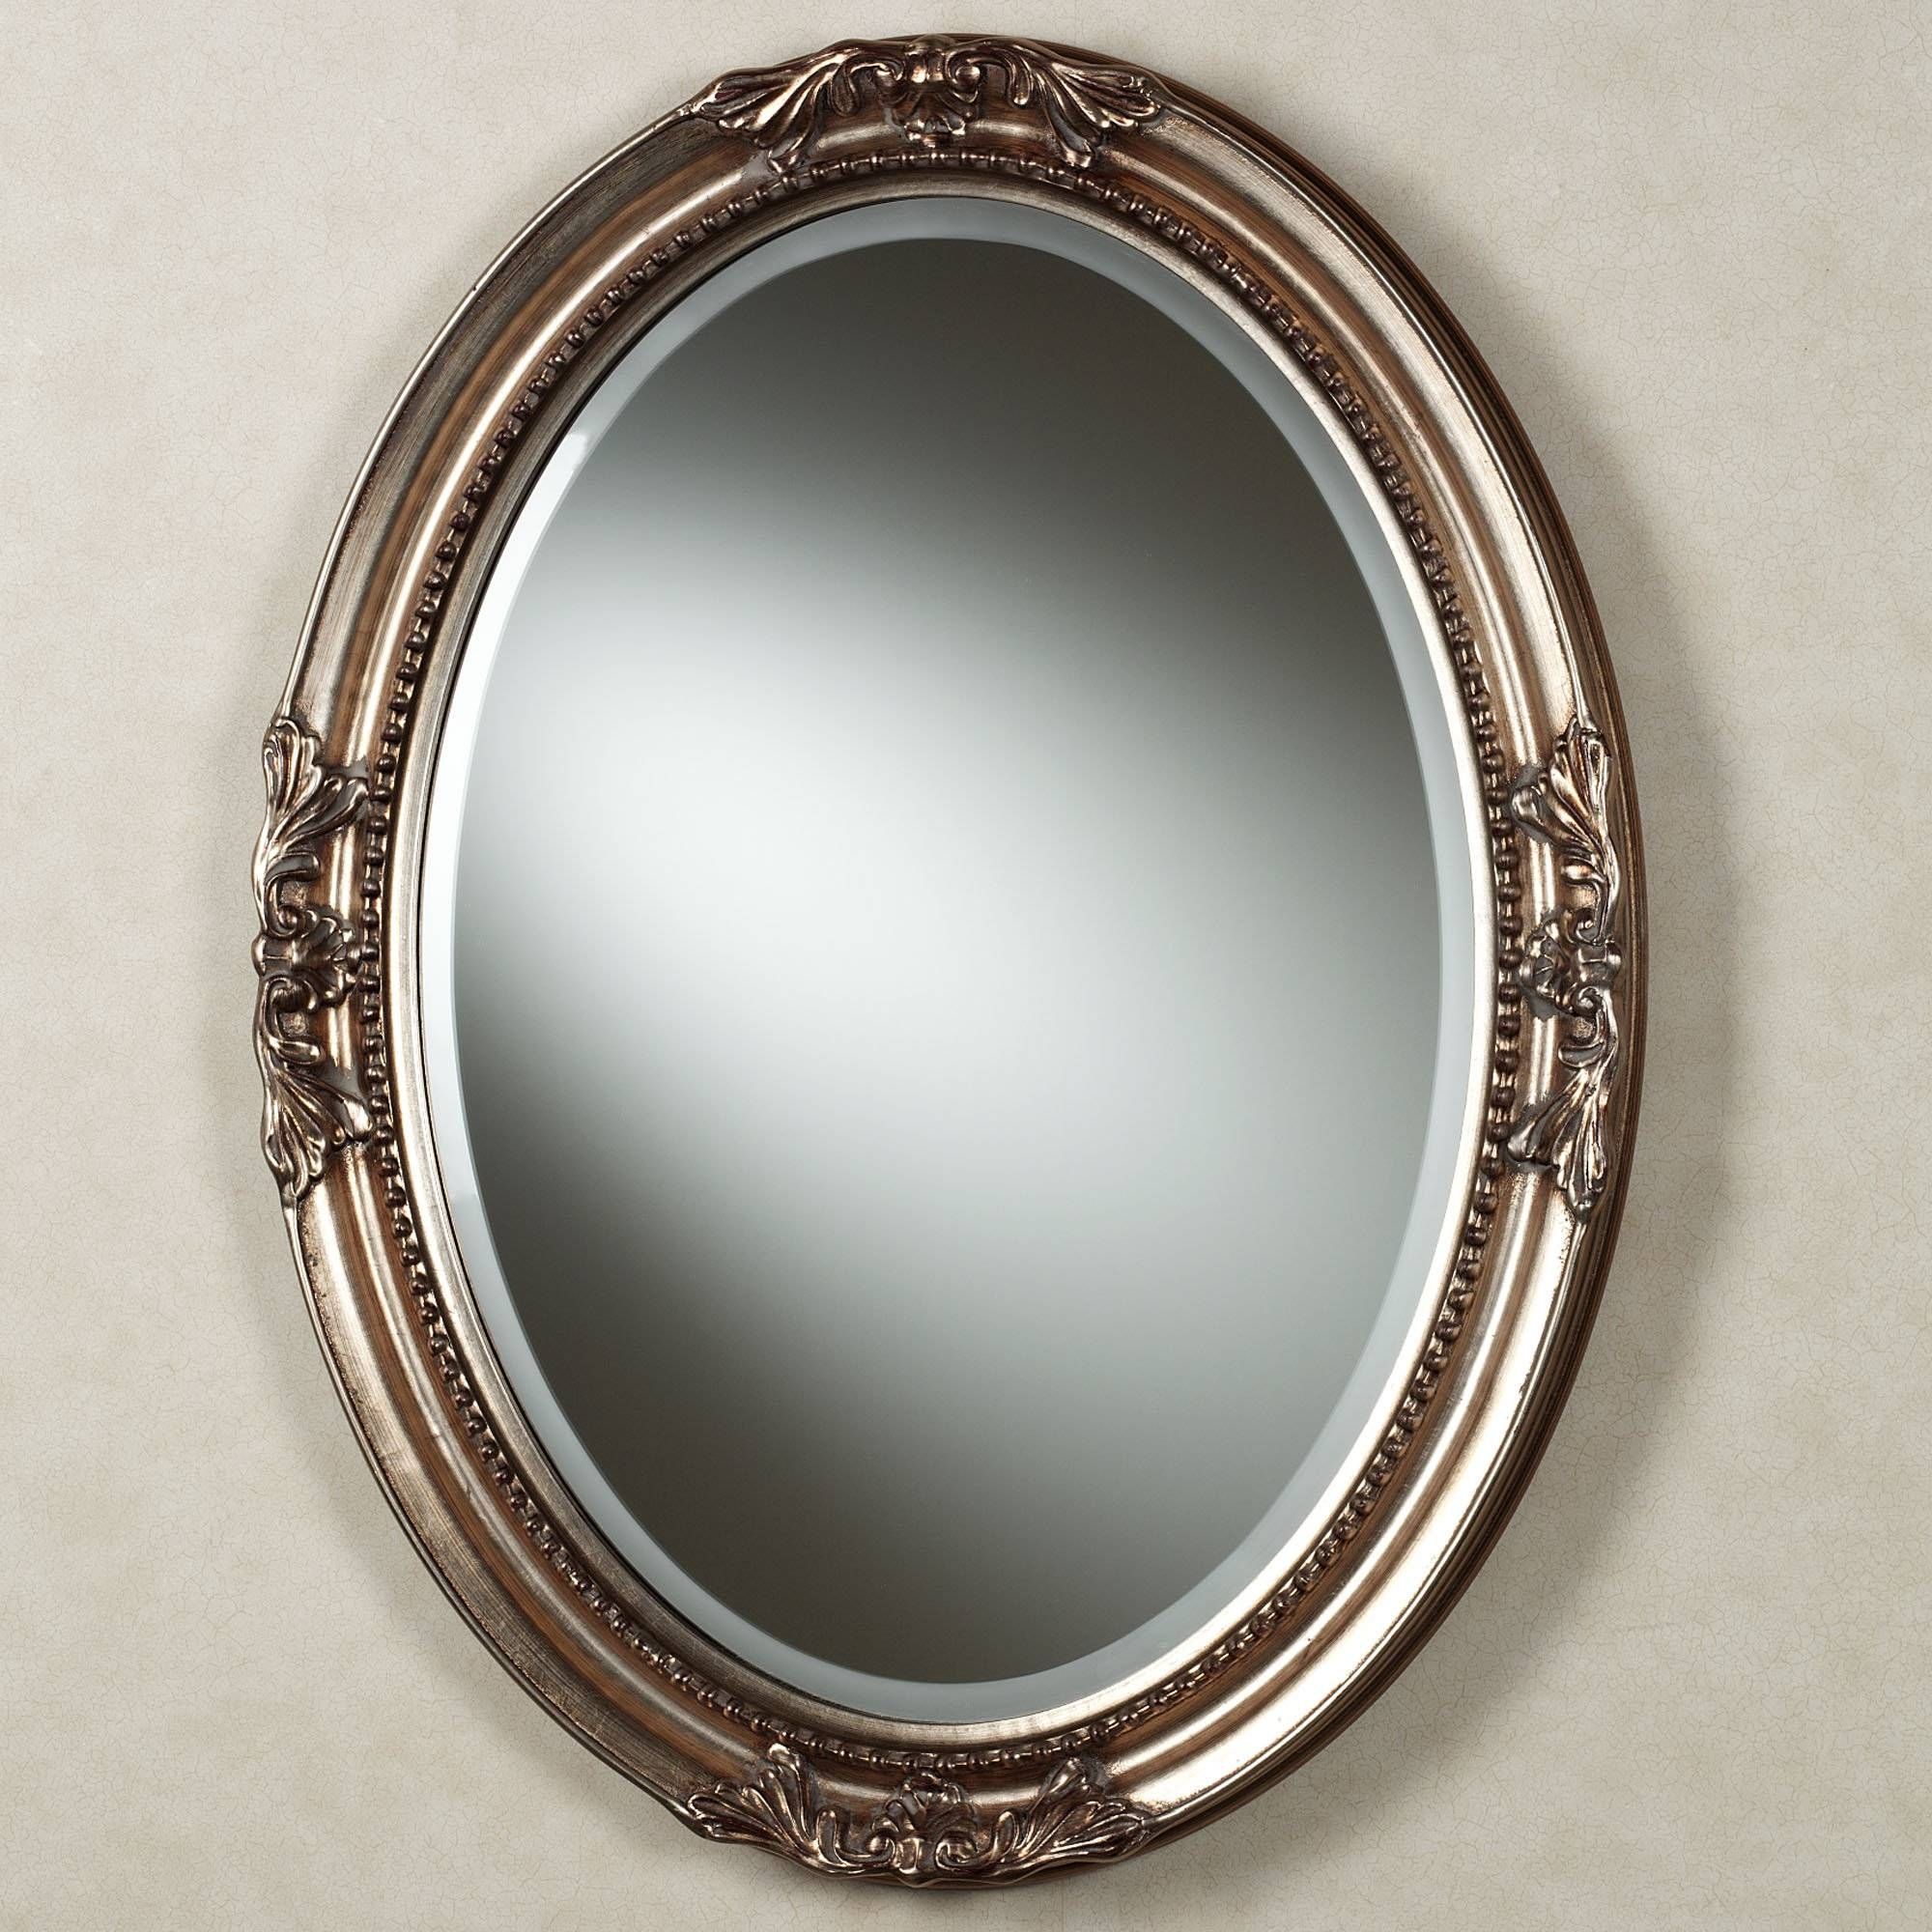 Make Your Room Magnificent With Oval Shaped Mirrors – In Decors Throughout Oval Shaped Wall Mirrors (View 1 of 15)